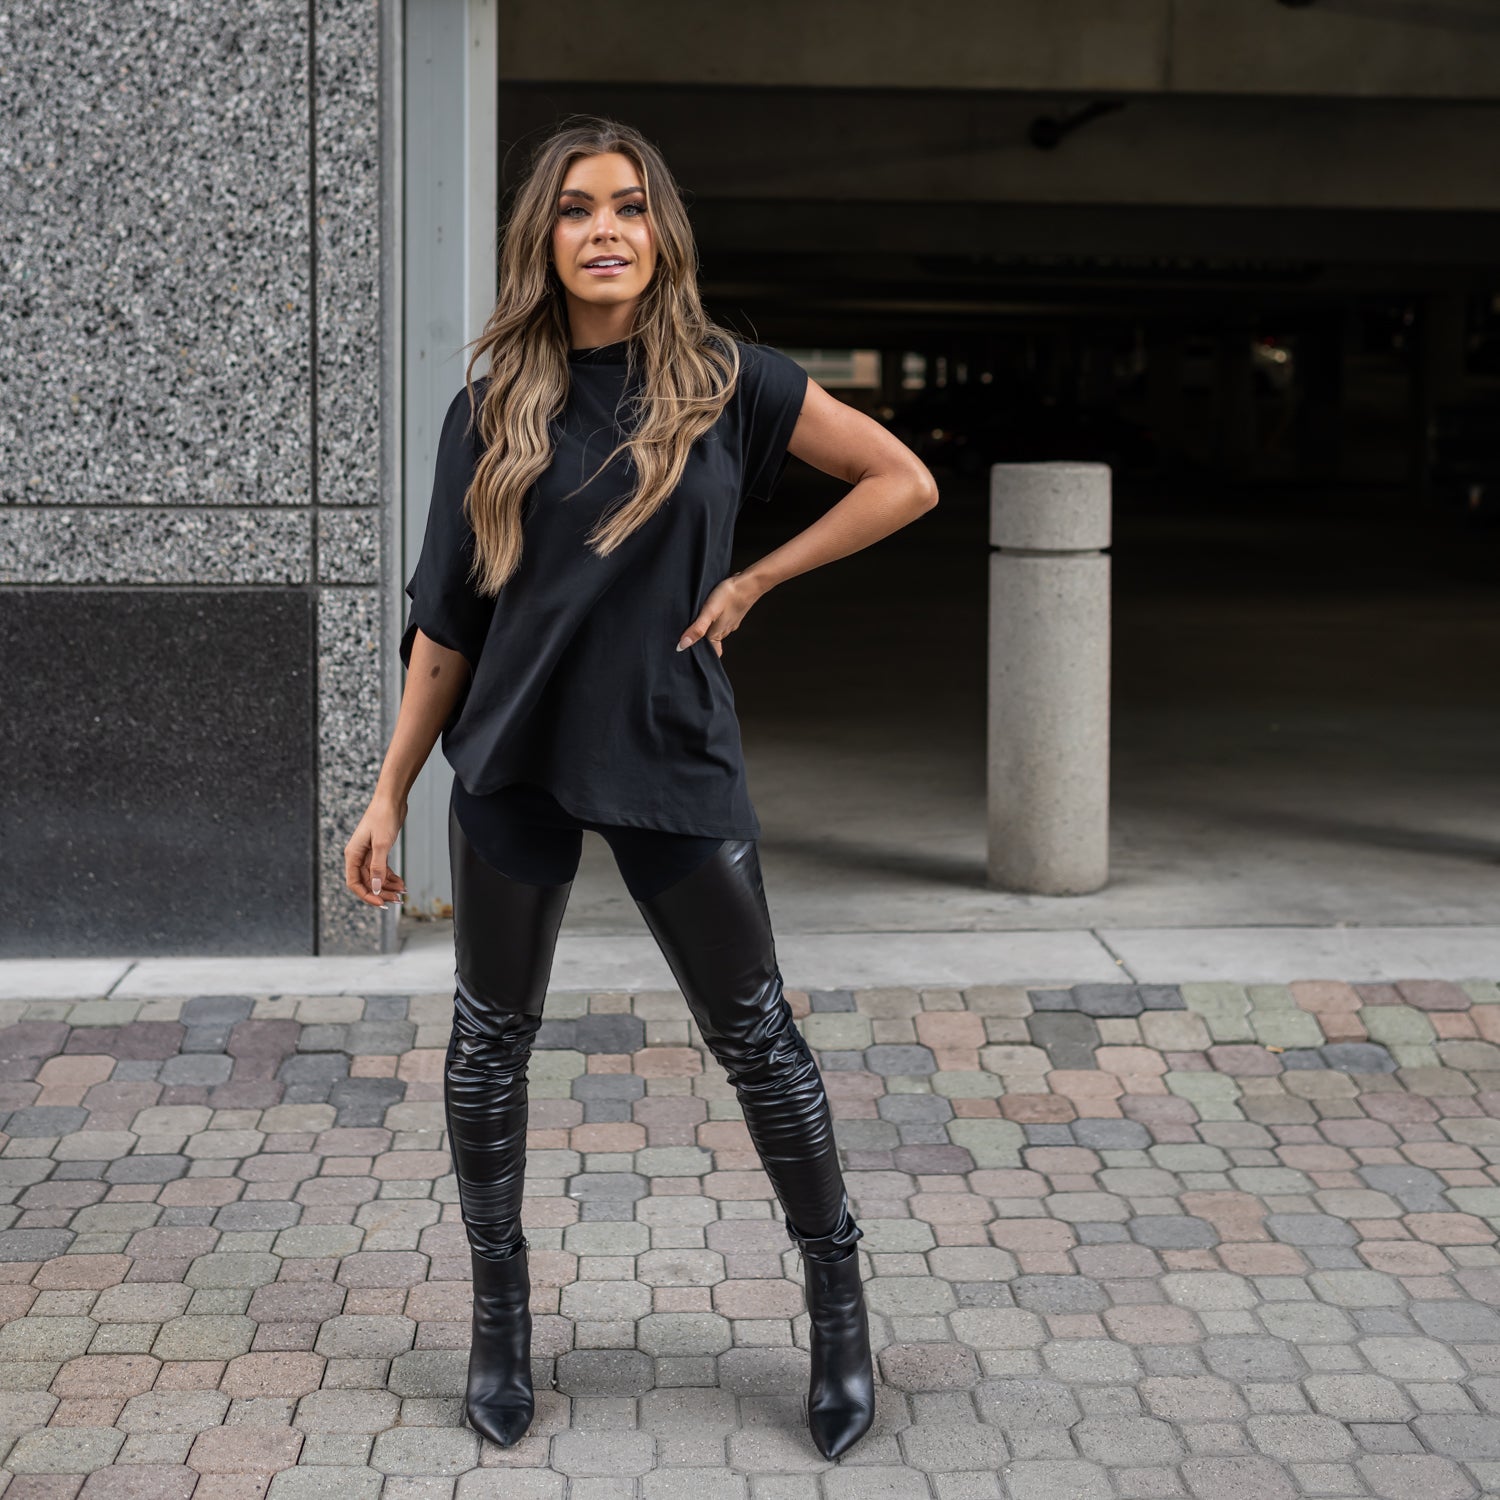 A woman wearing a pair of vegan black leather leggings mixed with organic cotton. She is also wearing a black asymmetrical top by Malaika New York